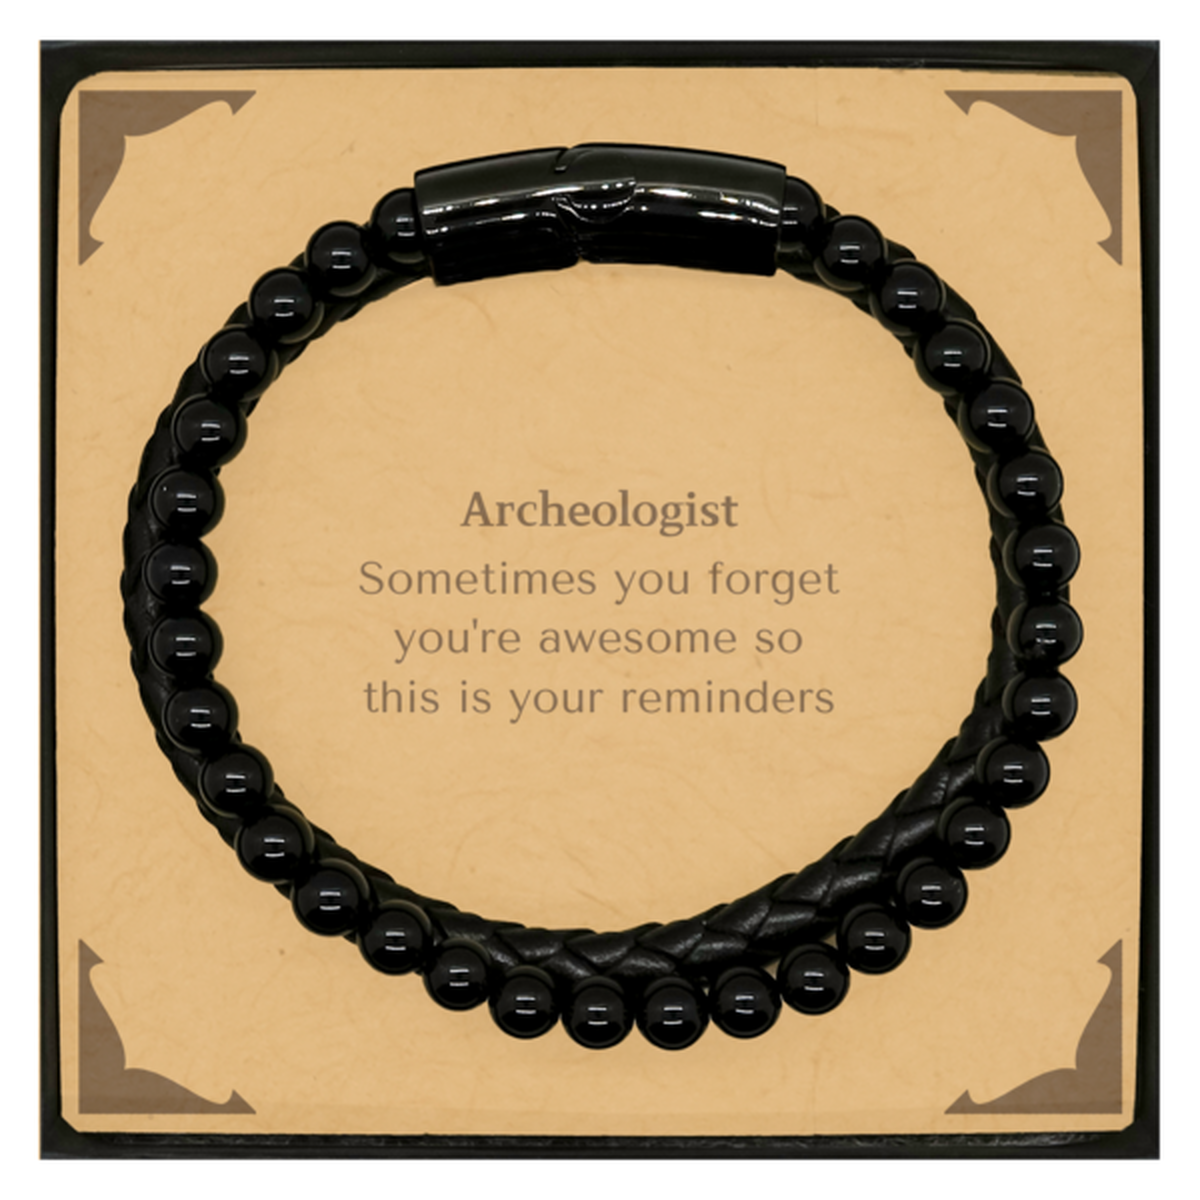 Sentimental Archeologist Stone Leather Bracelets, Archeologist Sometimes you forget you're awesome so this is your reminders, Graduation Christmas Birthday Gifts for Archeologist, Men, Women, Coworkers